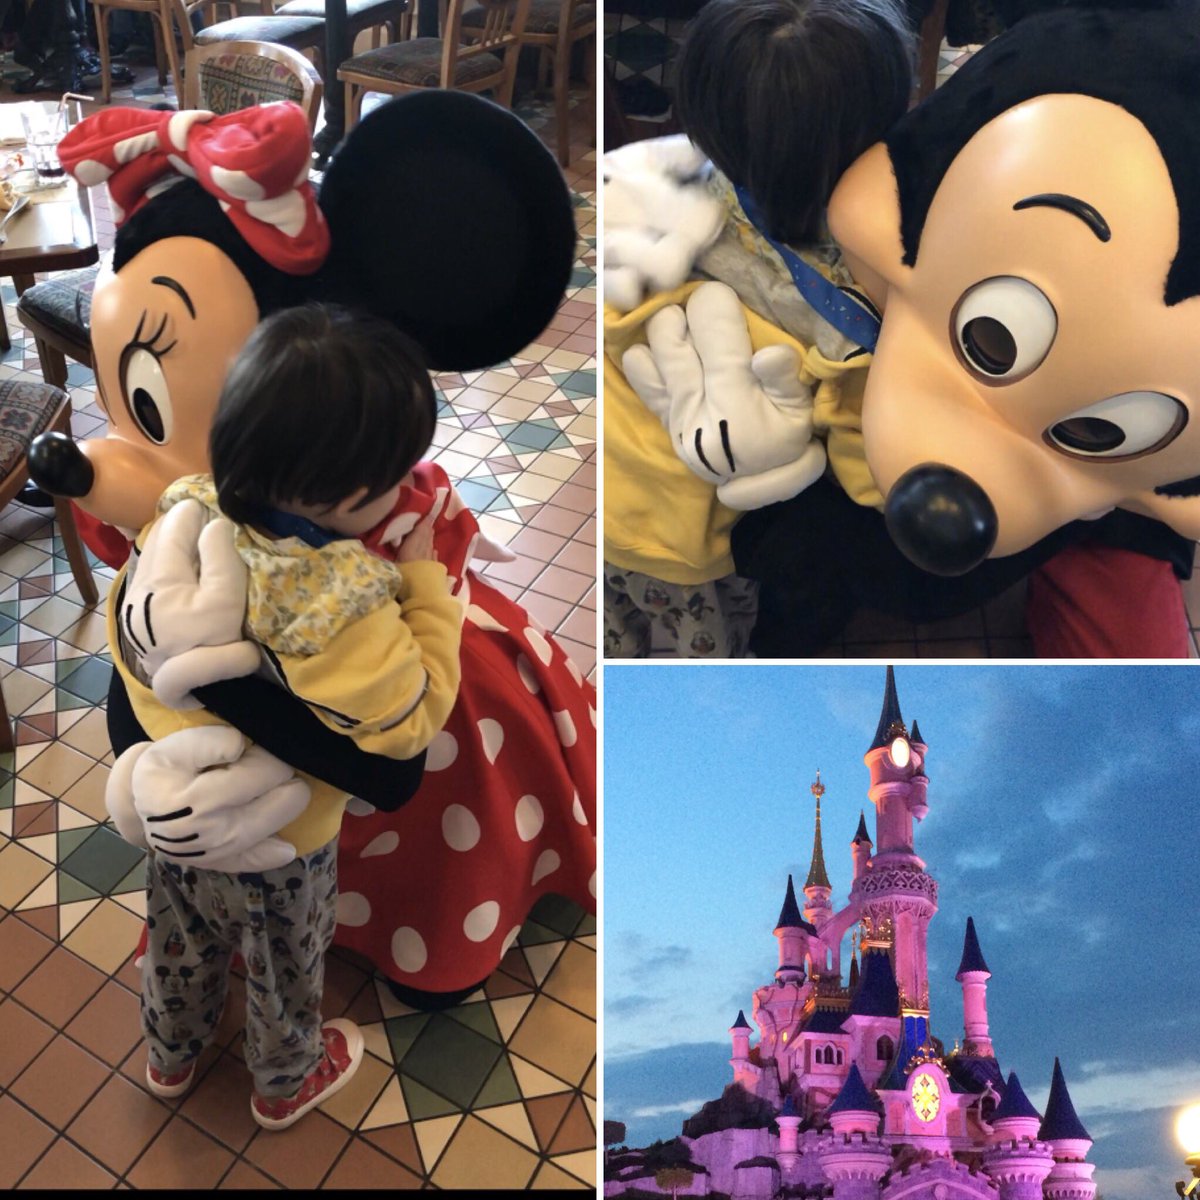 This is Oscar. He is almost 4. Today he met his two heroes Minnie & Mickey in Disneyland thanks to @MakeAWish_ie 💖His reaction was one of the most beautiful but heartbreaking things I’ll ever see thanks to DIPG. Please RT to raise awareness #EndDIPG #DIPGAwarenessDay